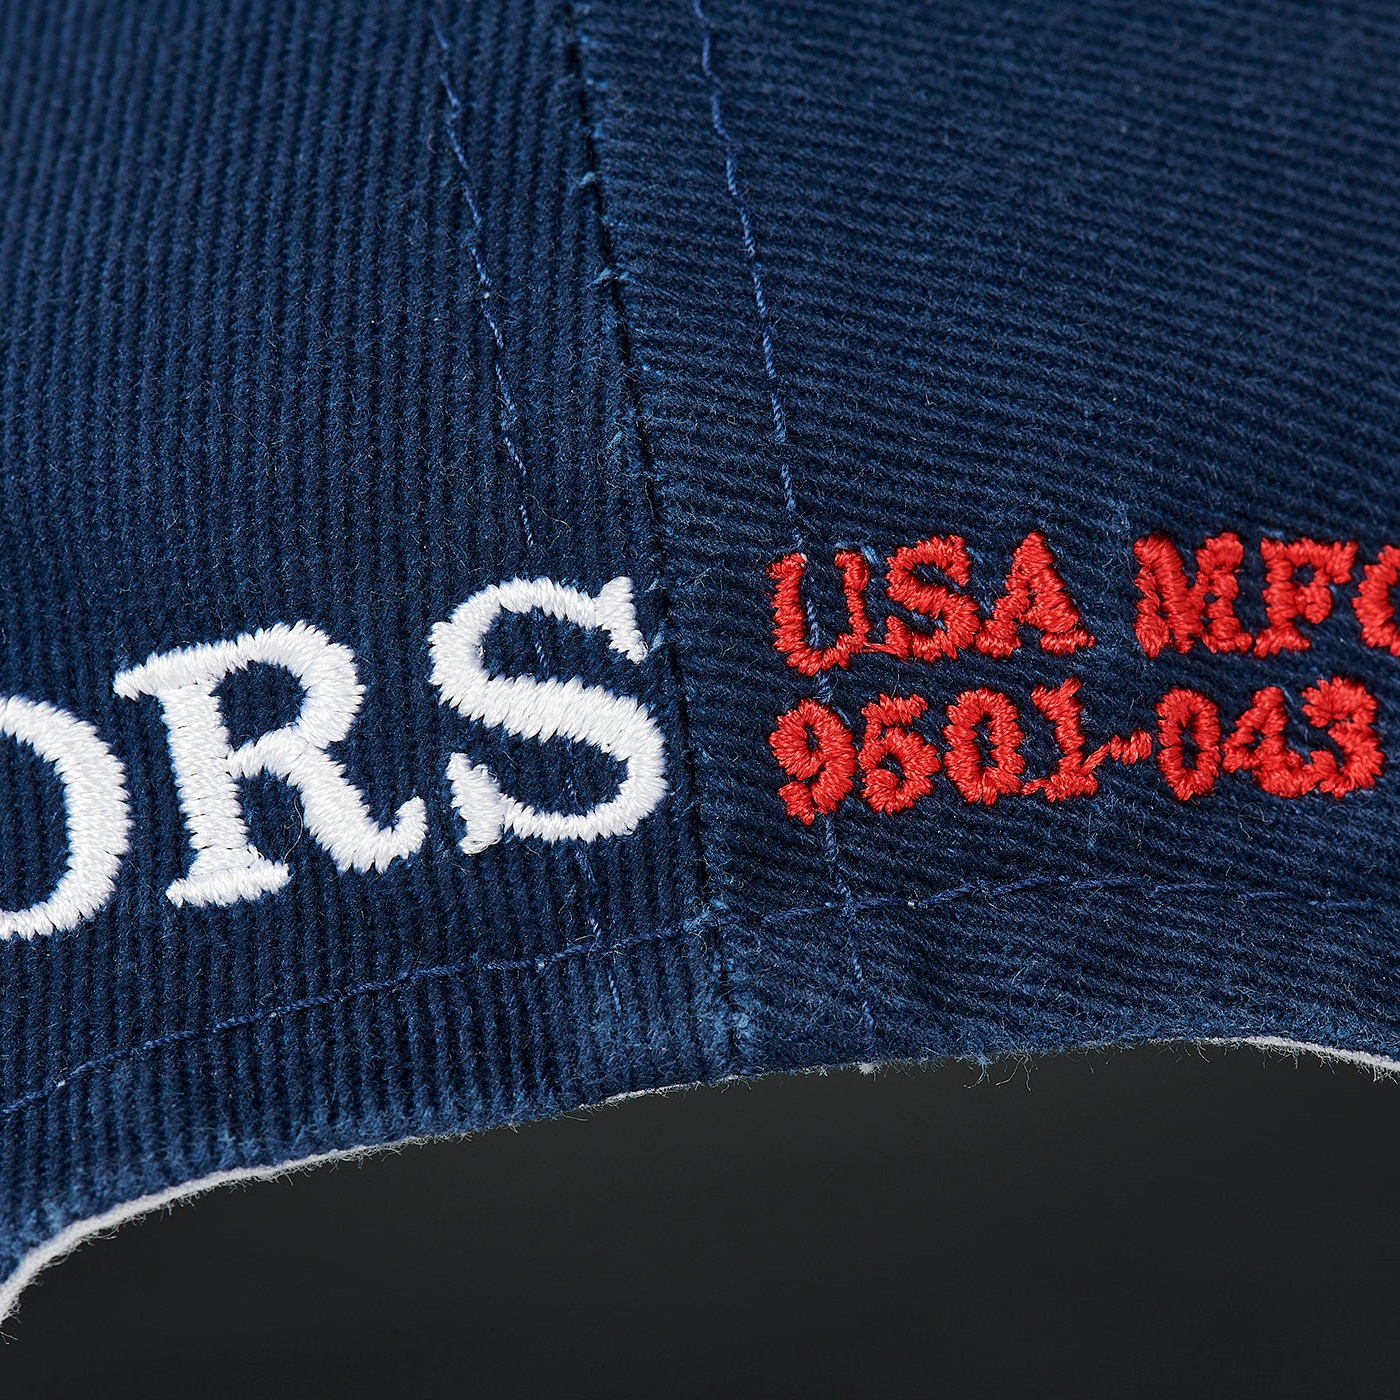 Thumbnail PALACE DROORS 6-PANEL NAVY one color